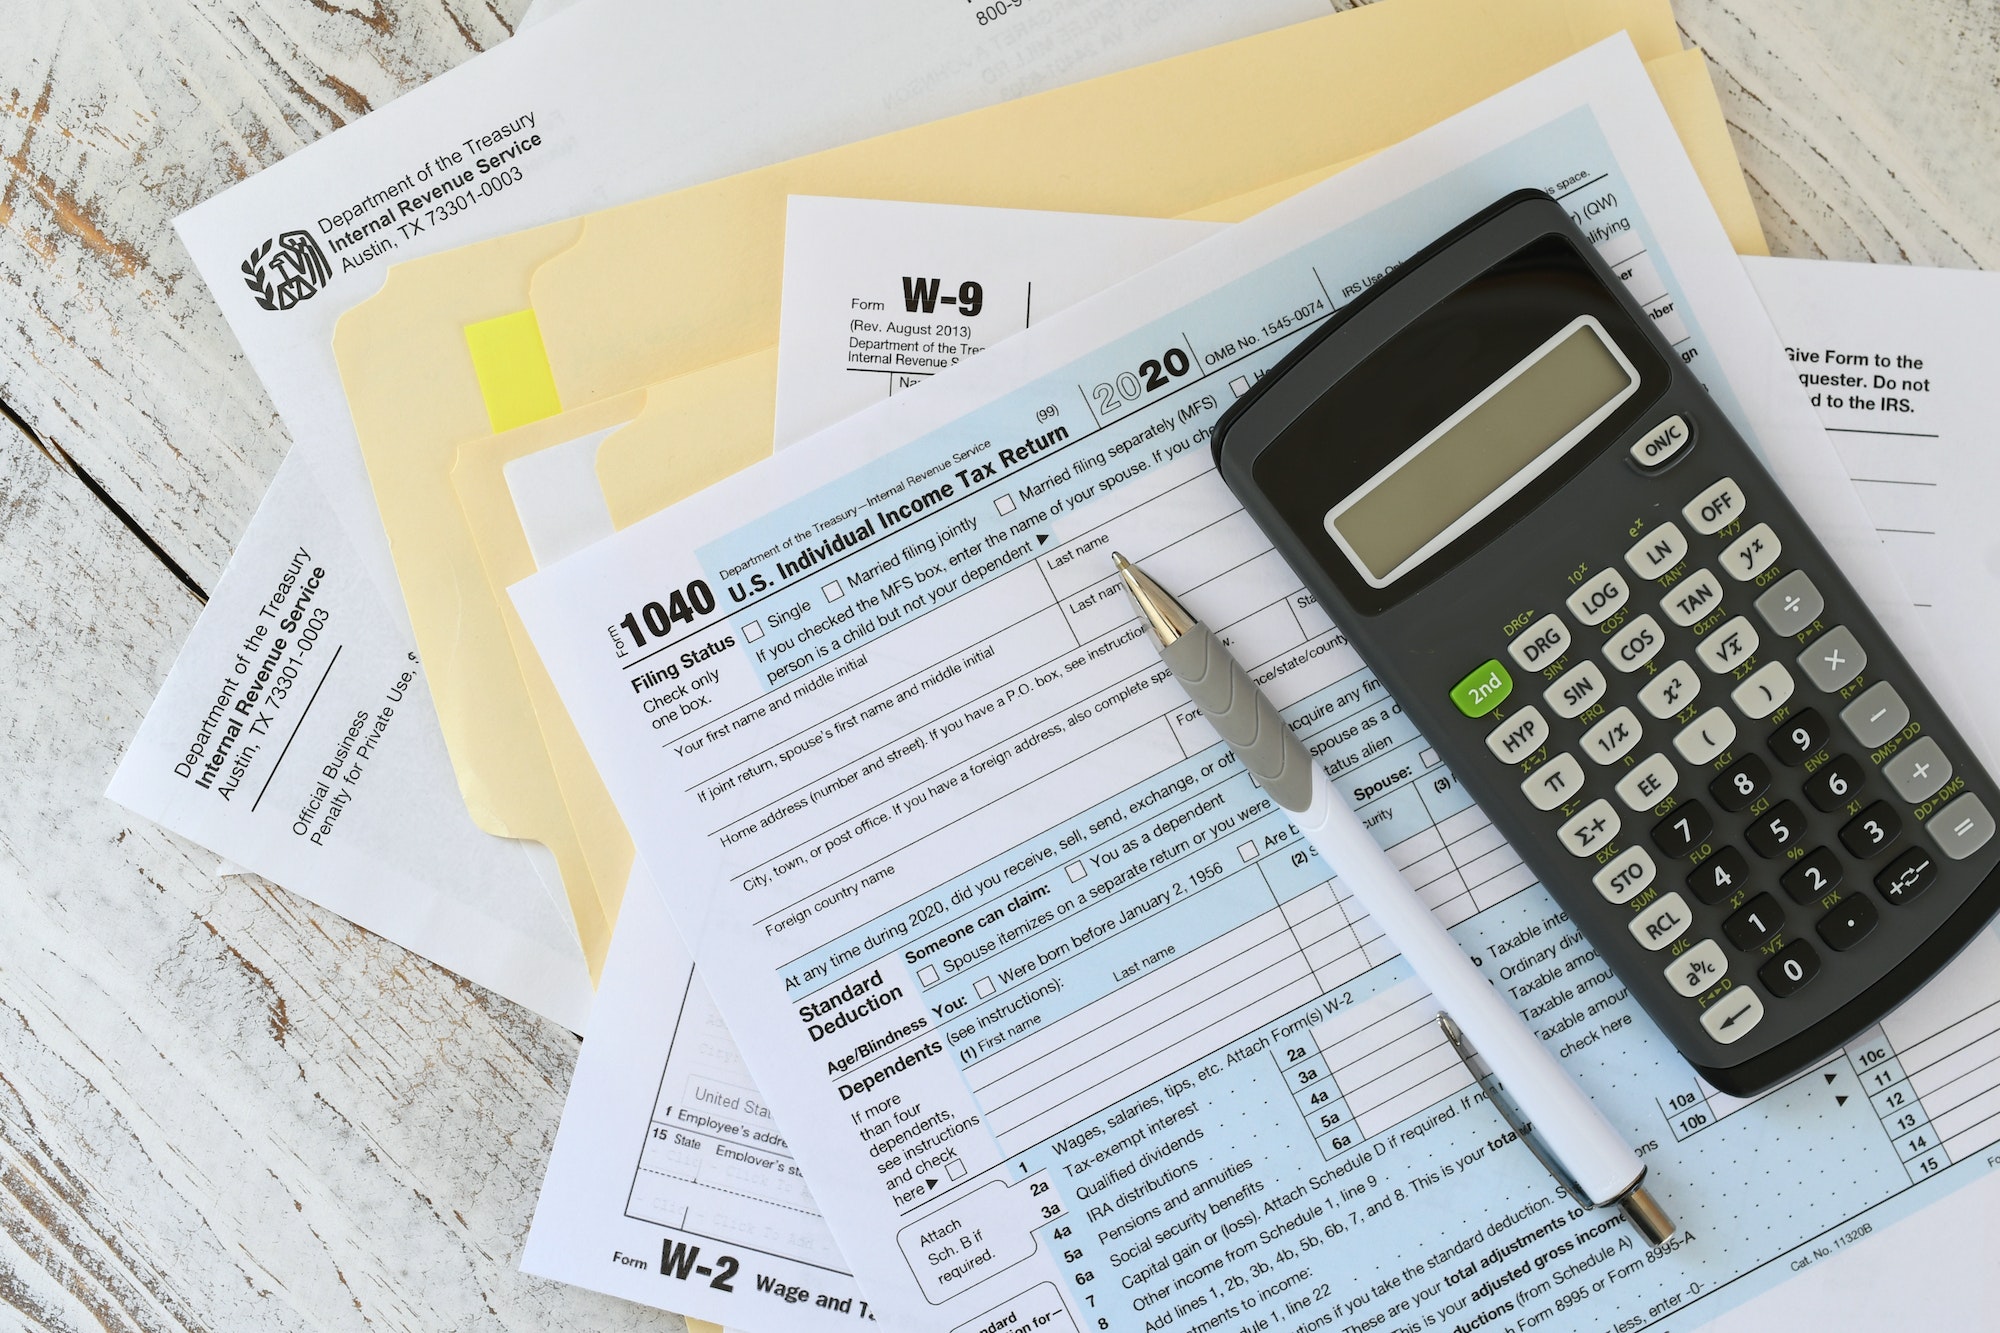 Time to file taxes, income tax forms, IRS deadline, paperwork, April 15th, owe, refund, payment